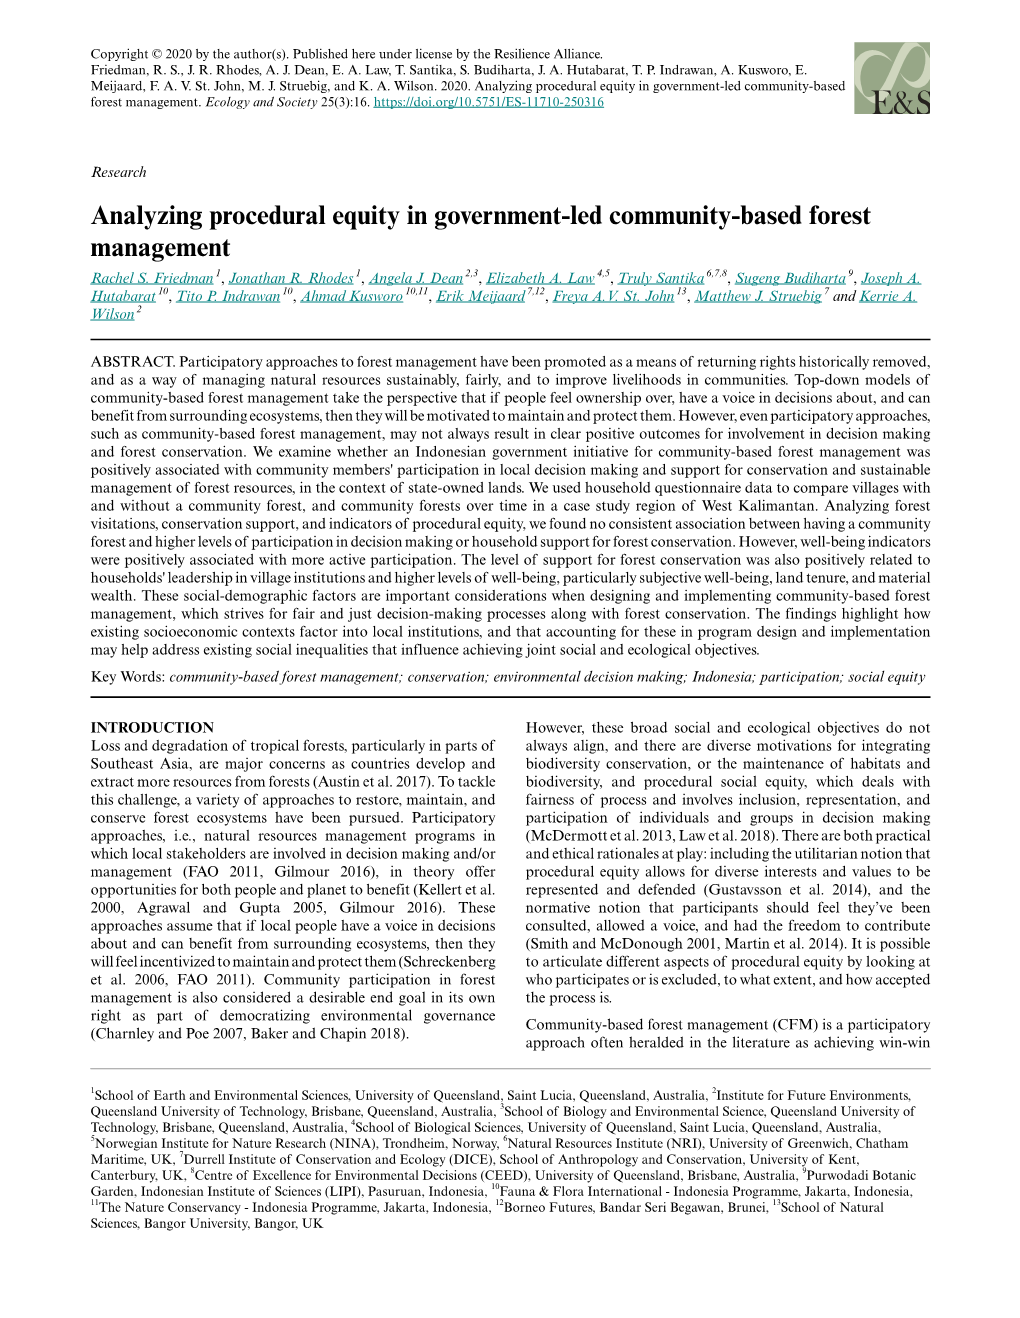 Analyzing Procedural Equity in Government-Led Community-Based Forest Management